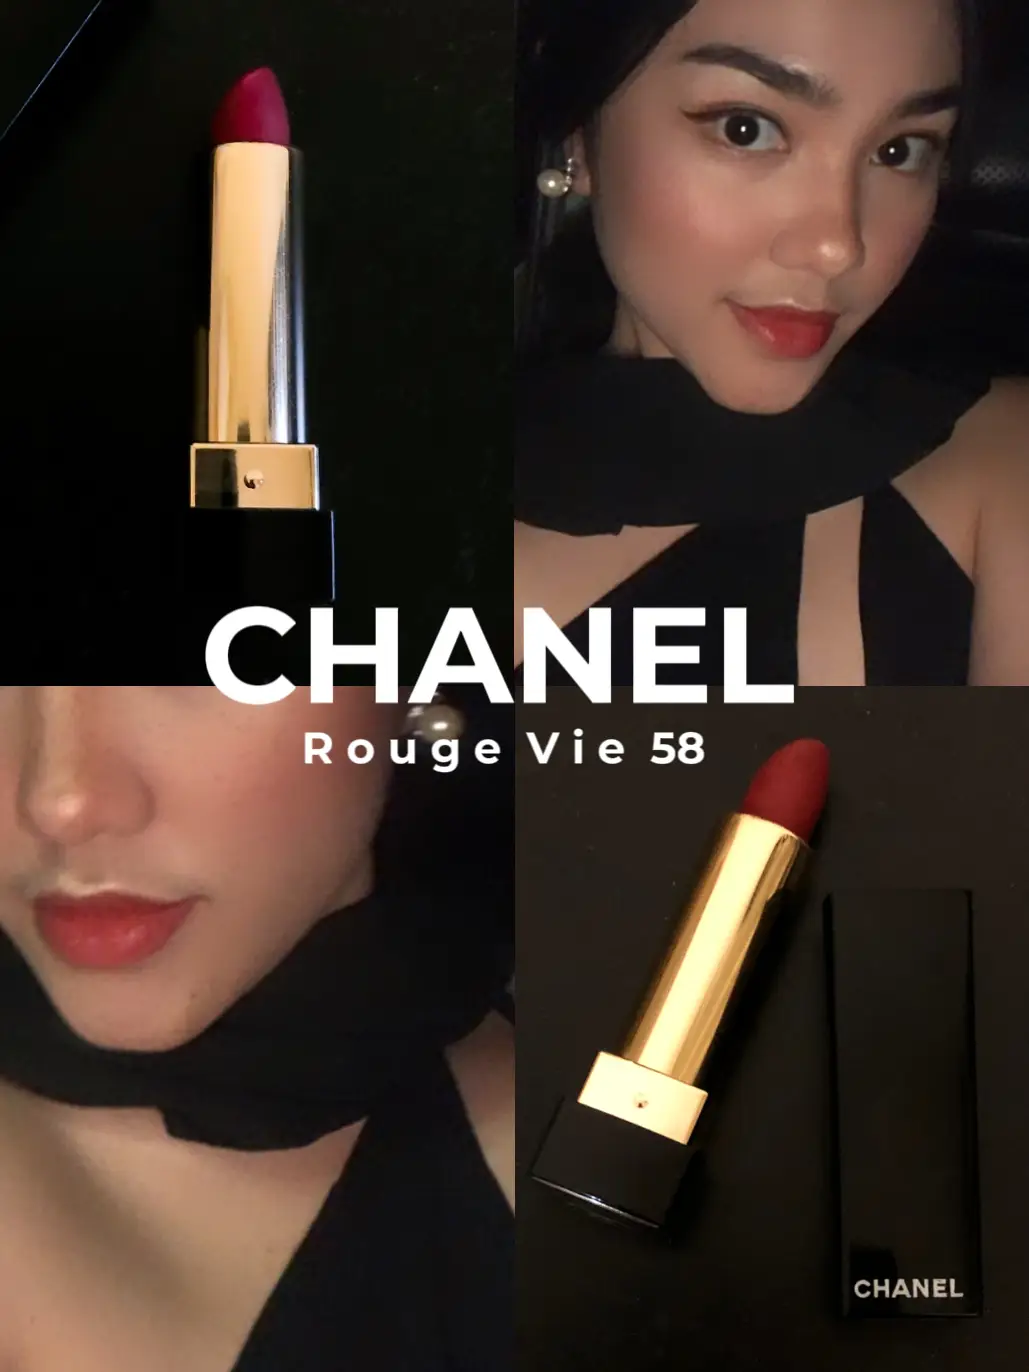 Chanel Rouge Allure Velvet Extreme Review - Reviews and Other Stuff